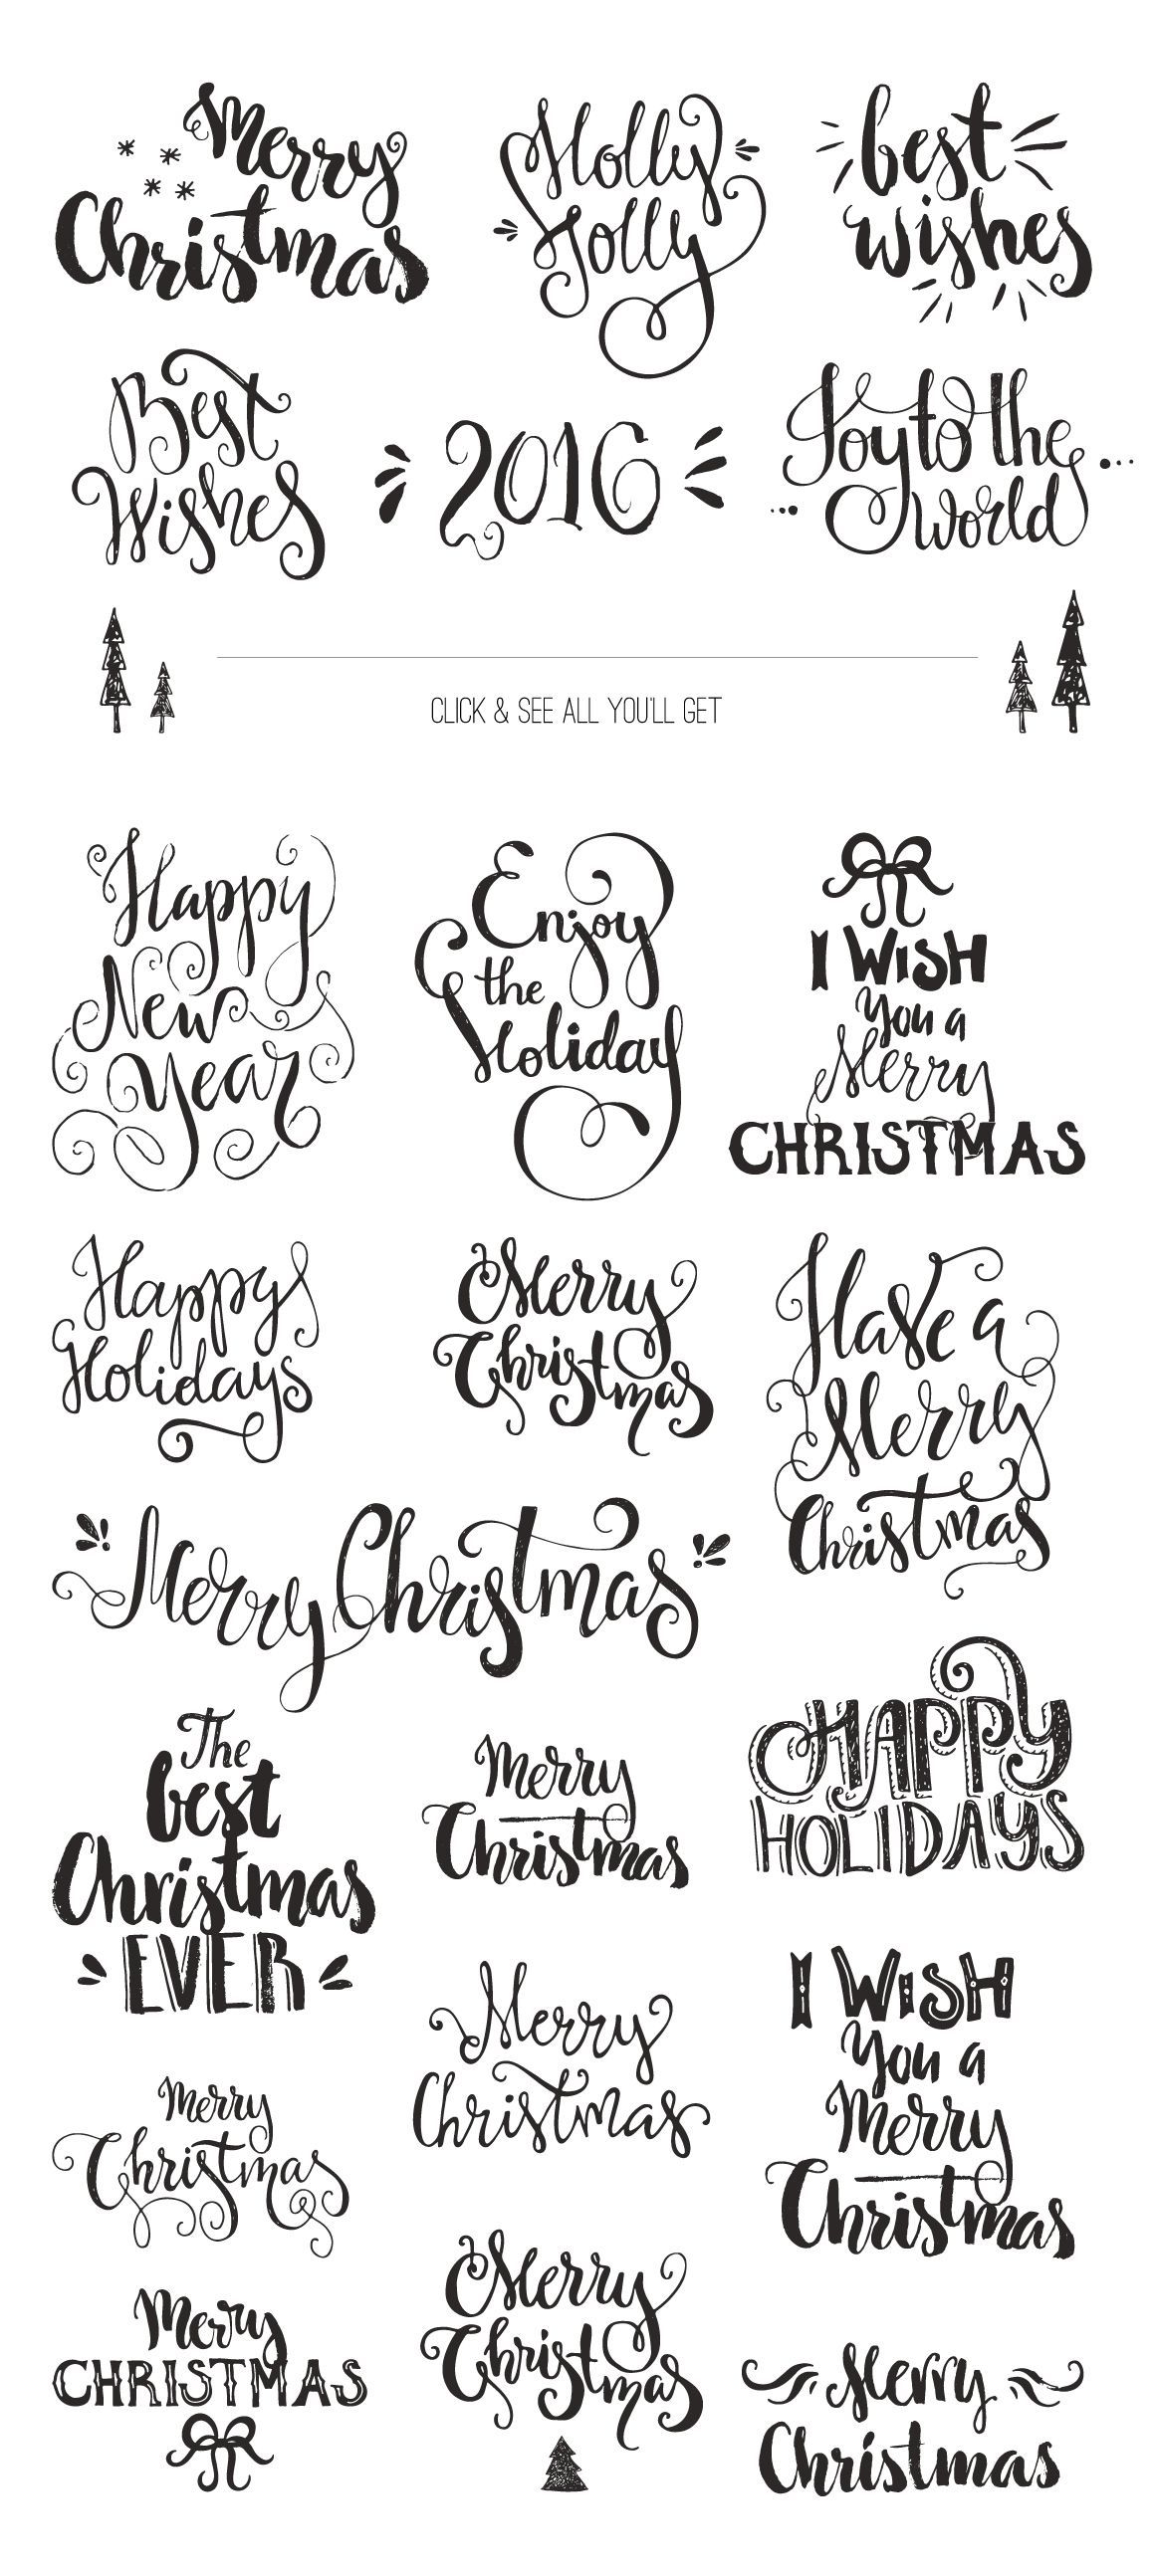 Handdrawn Christmas Photo Overlays by Favete Art on Creative Market